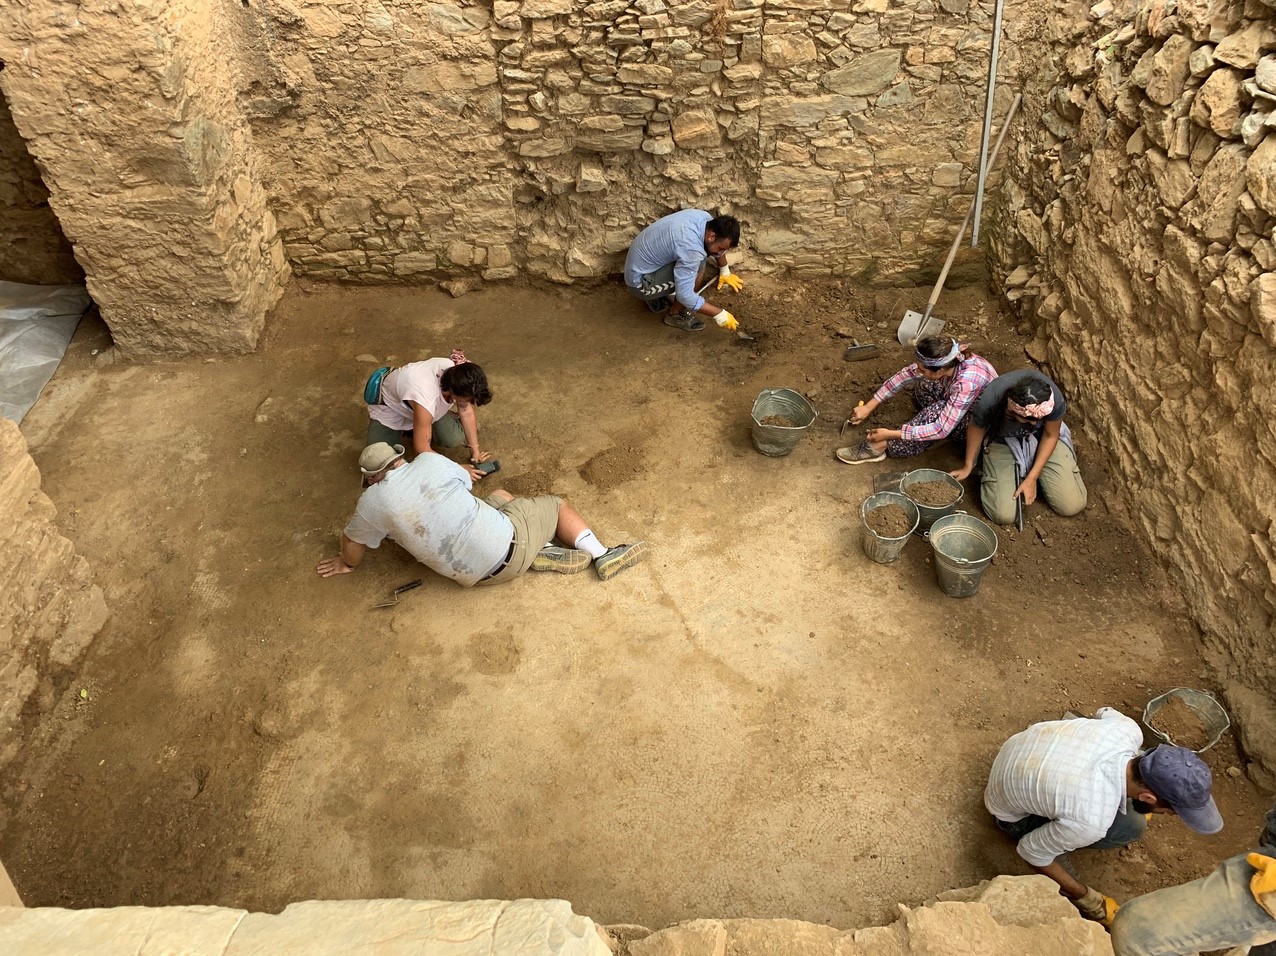 Students working on archaeological site in Turkey.